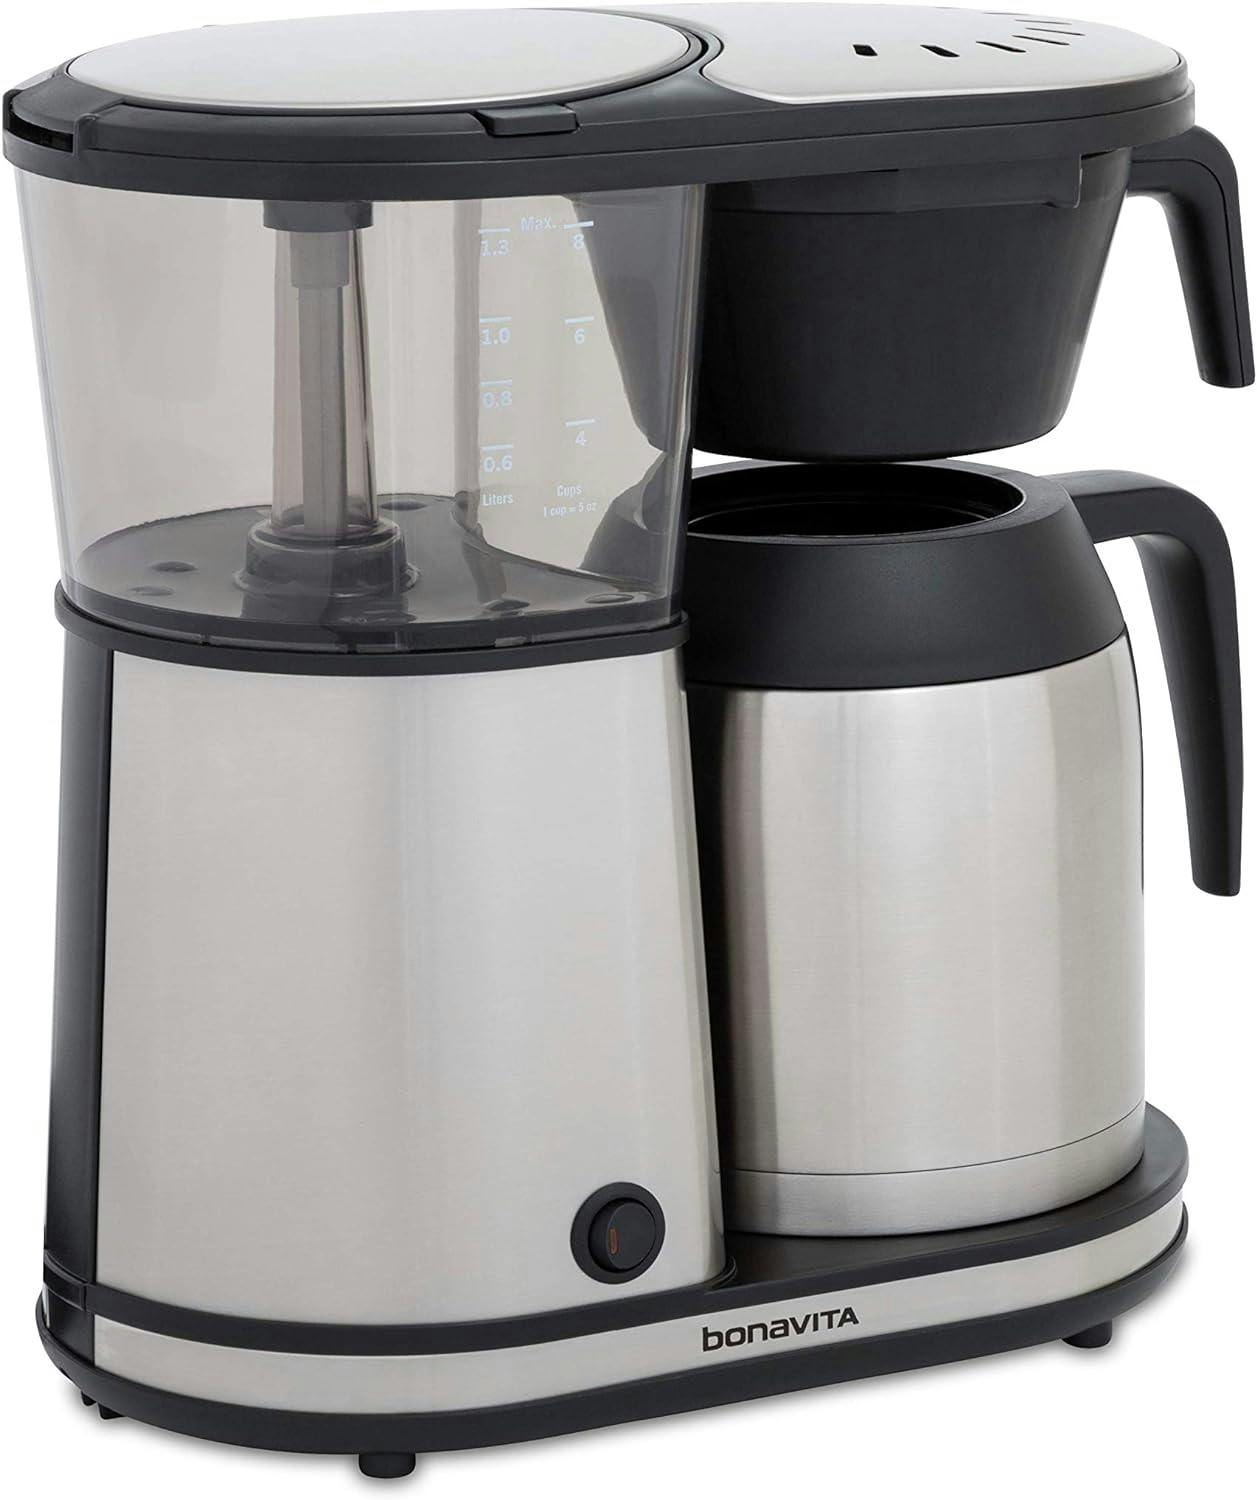 Elevate 8-Cup Stainless Steel Thermal Carafe Drip Coffee Maker